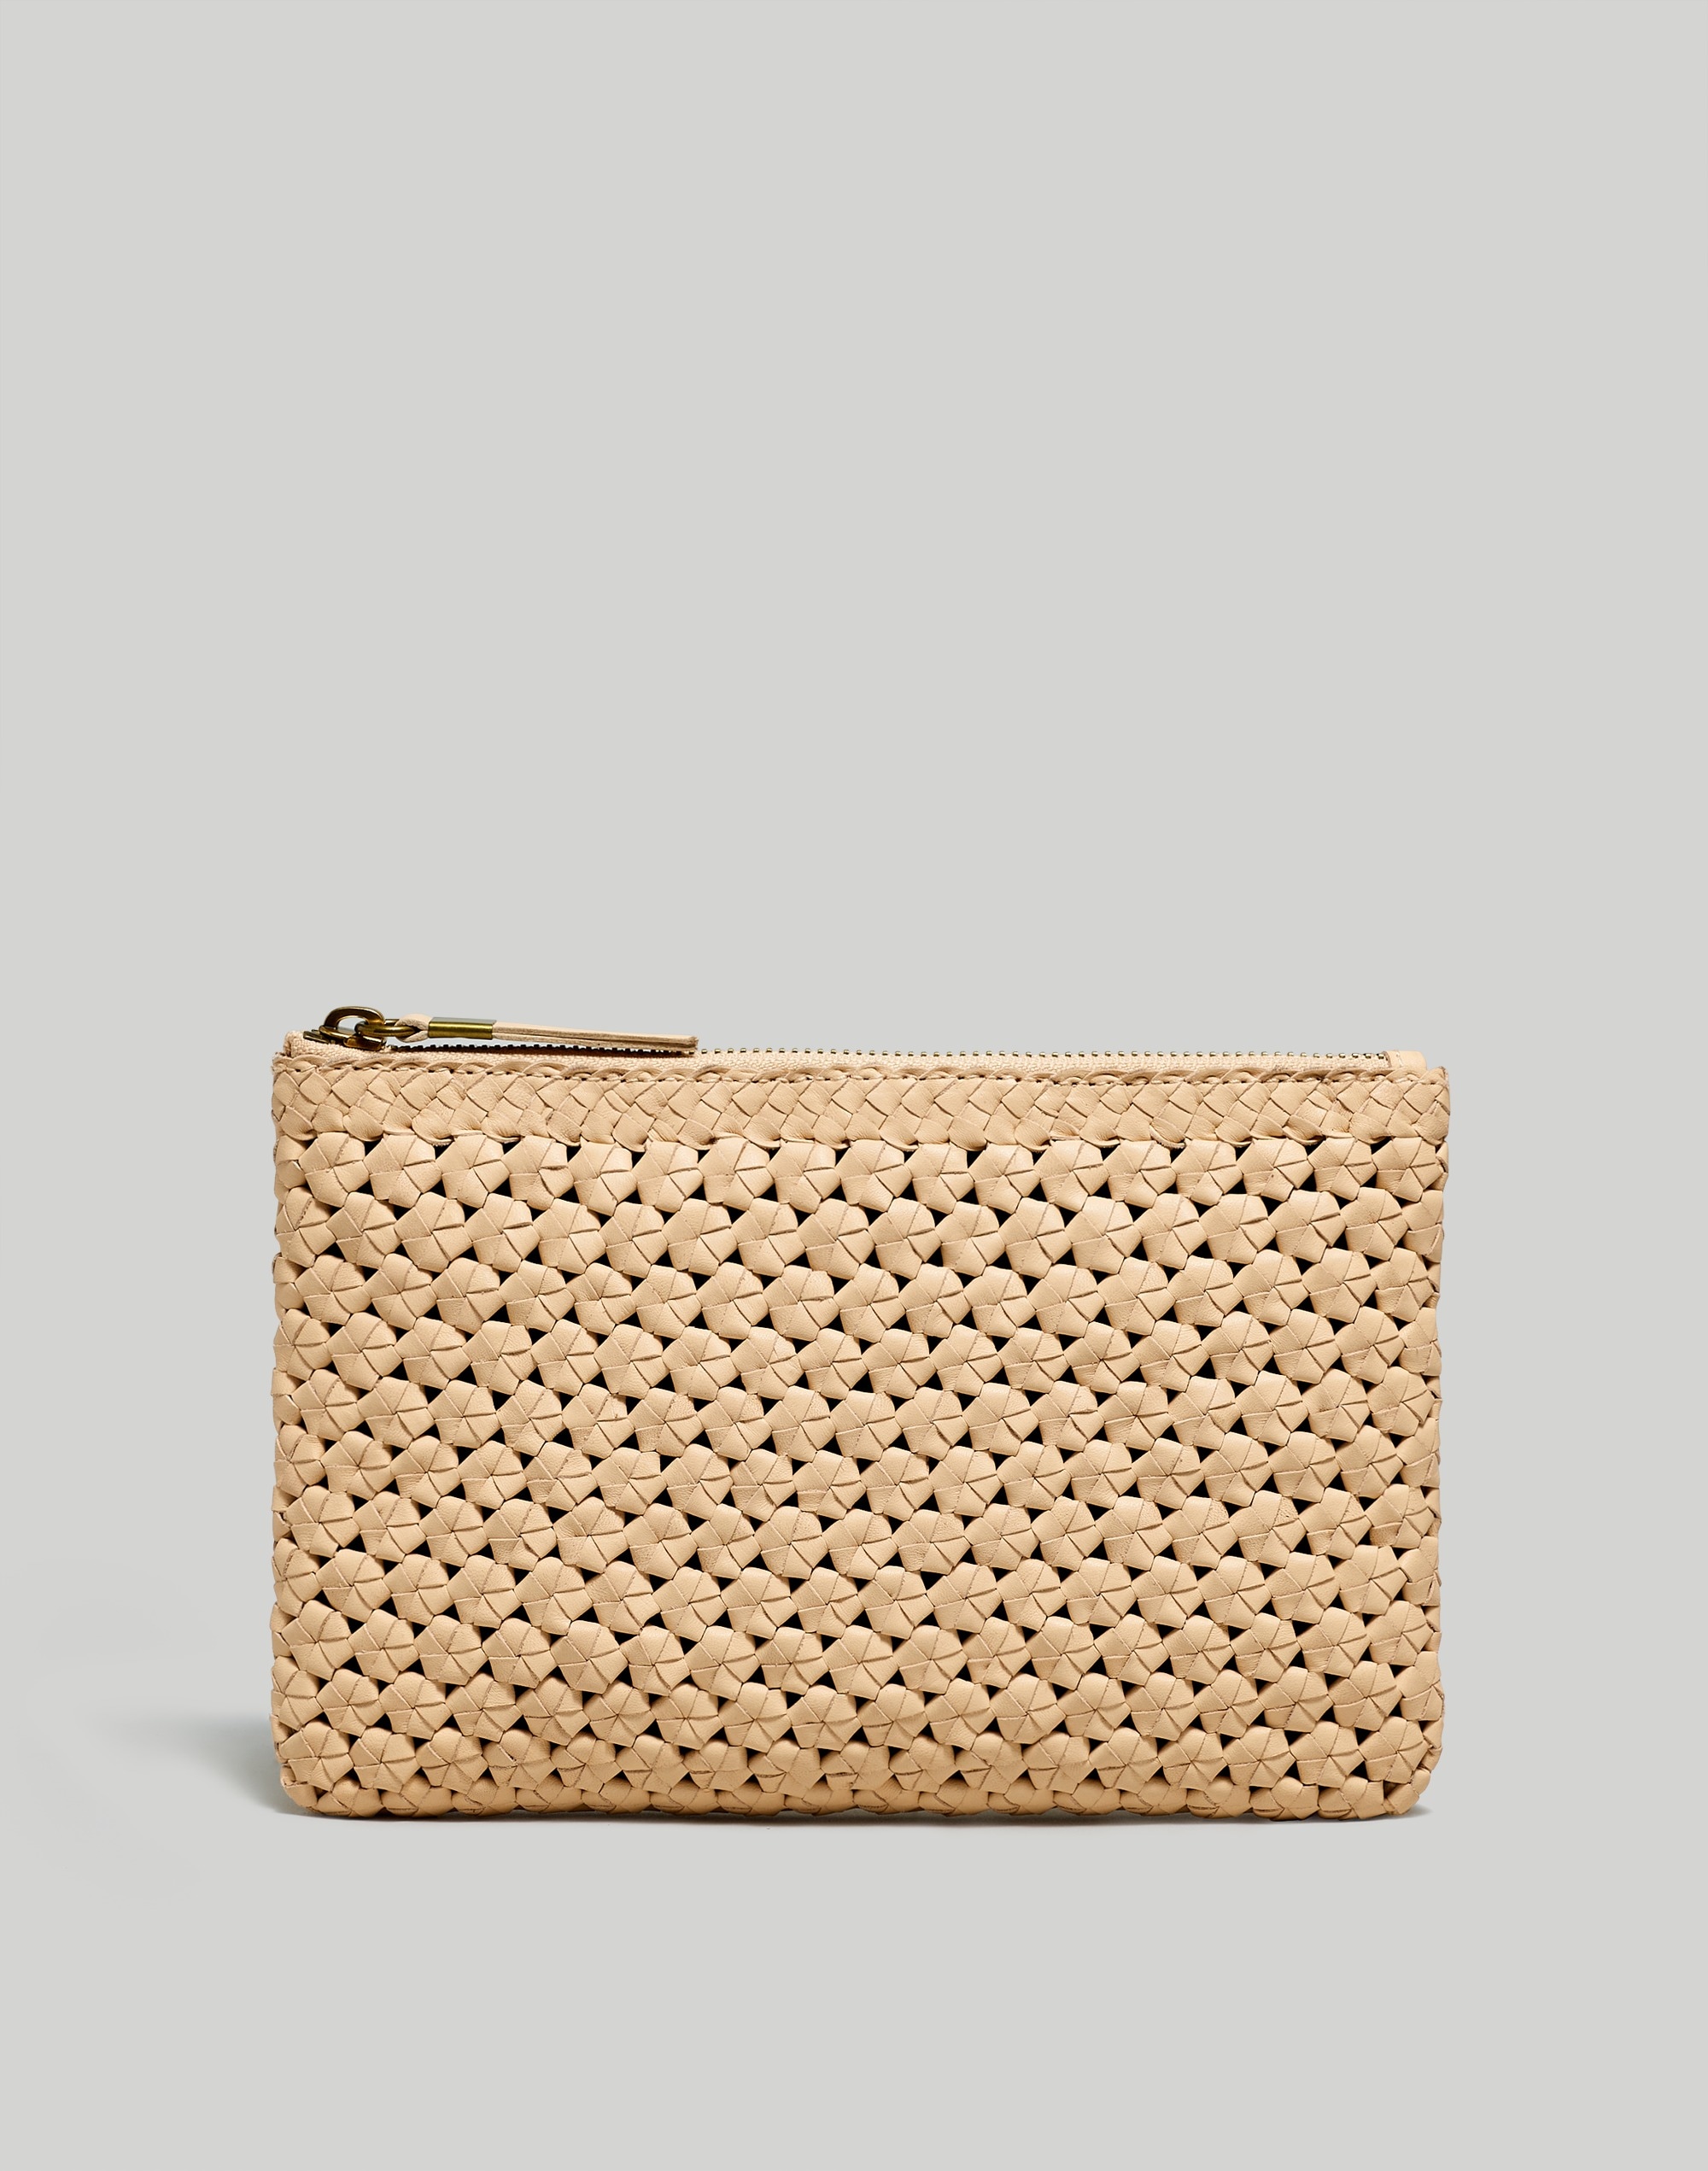 The Leather Pouch Clutch: Crochet Edition